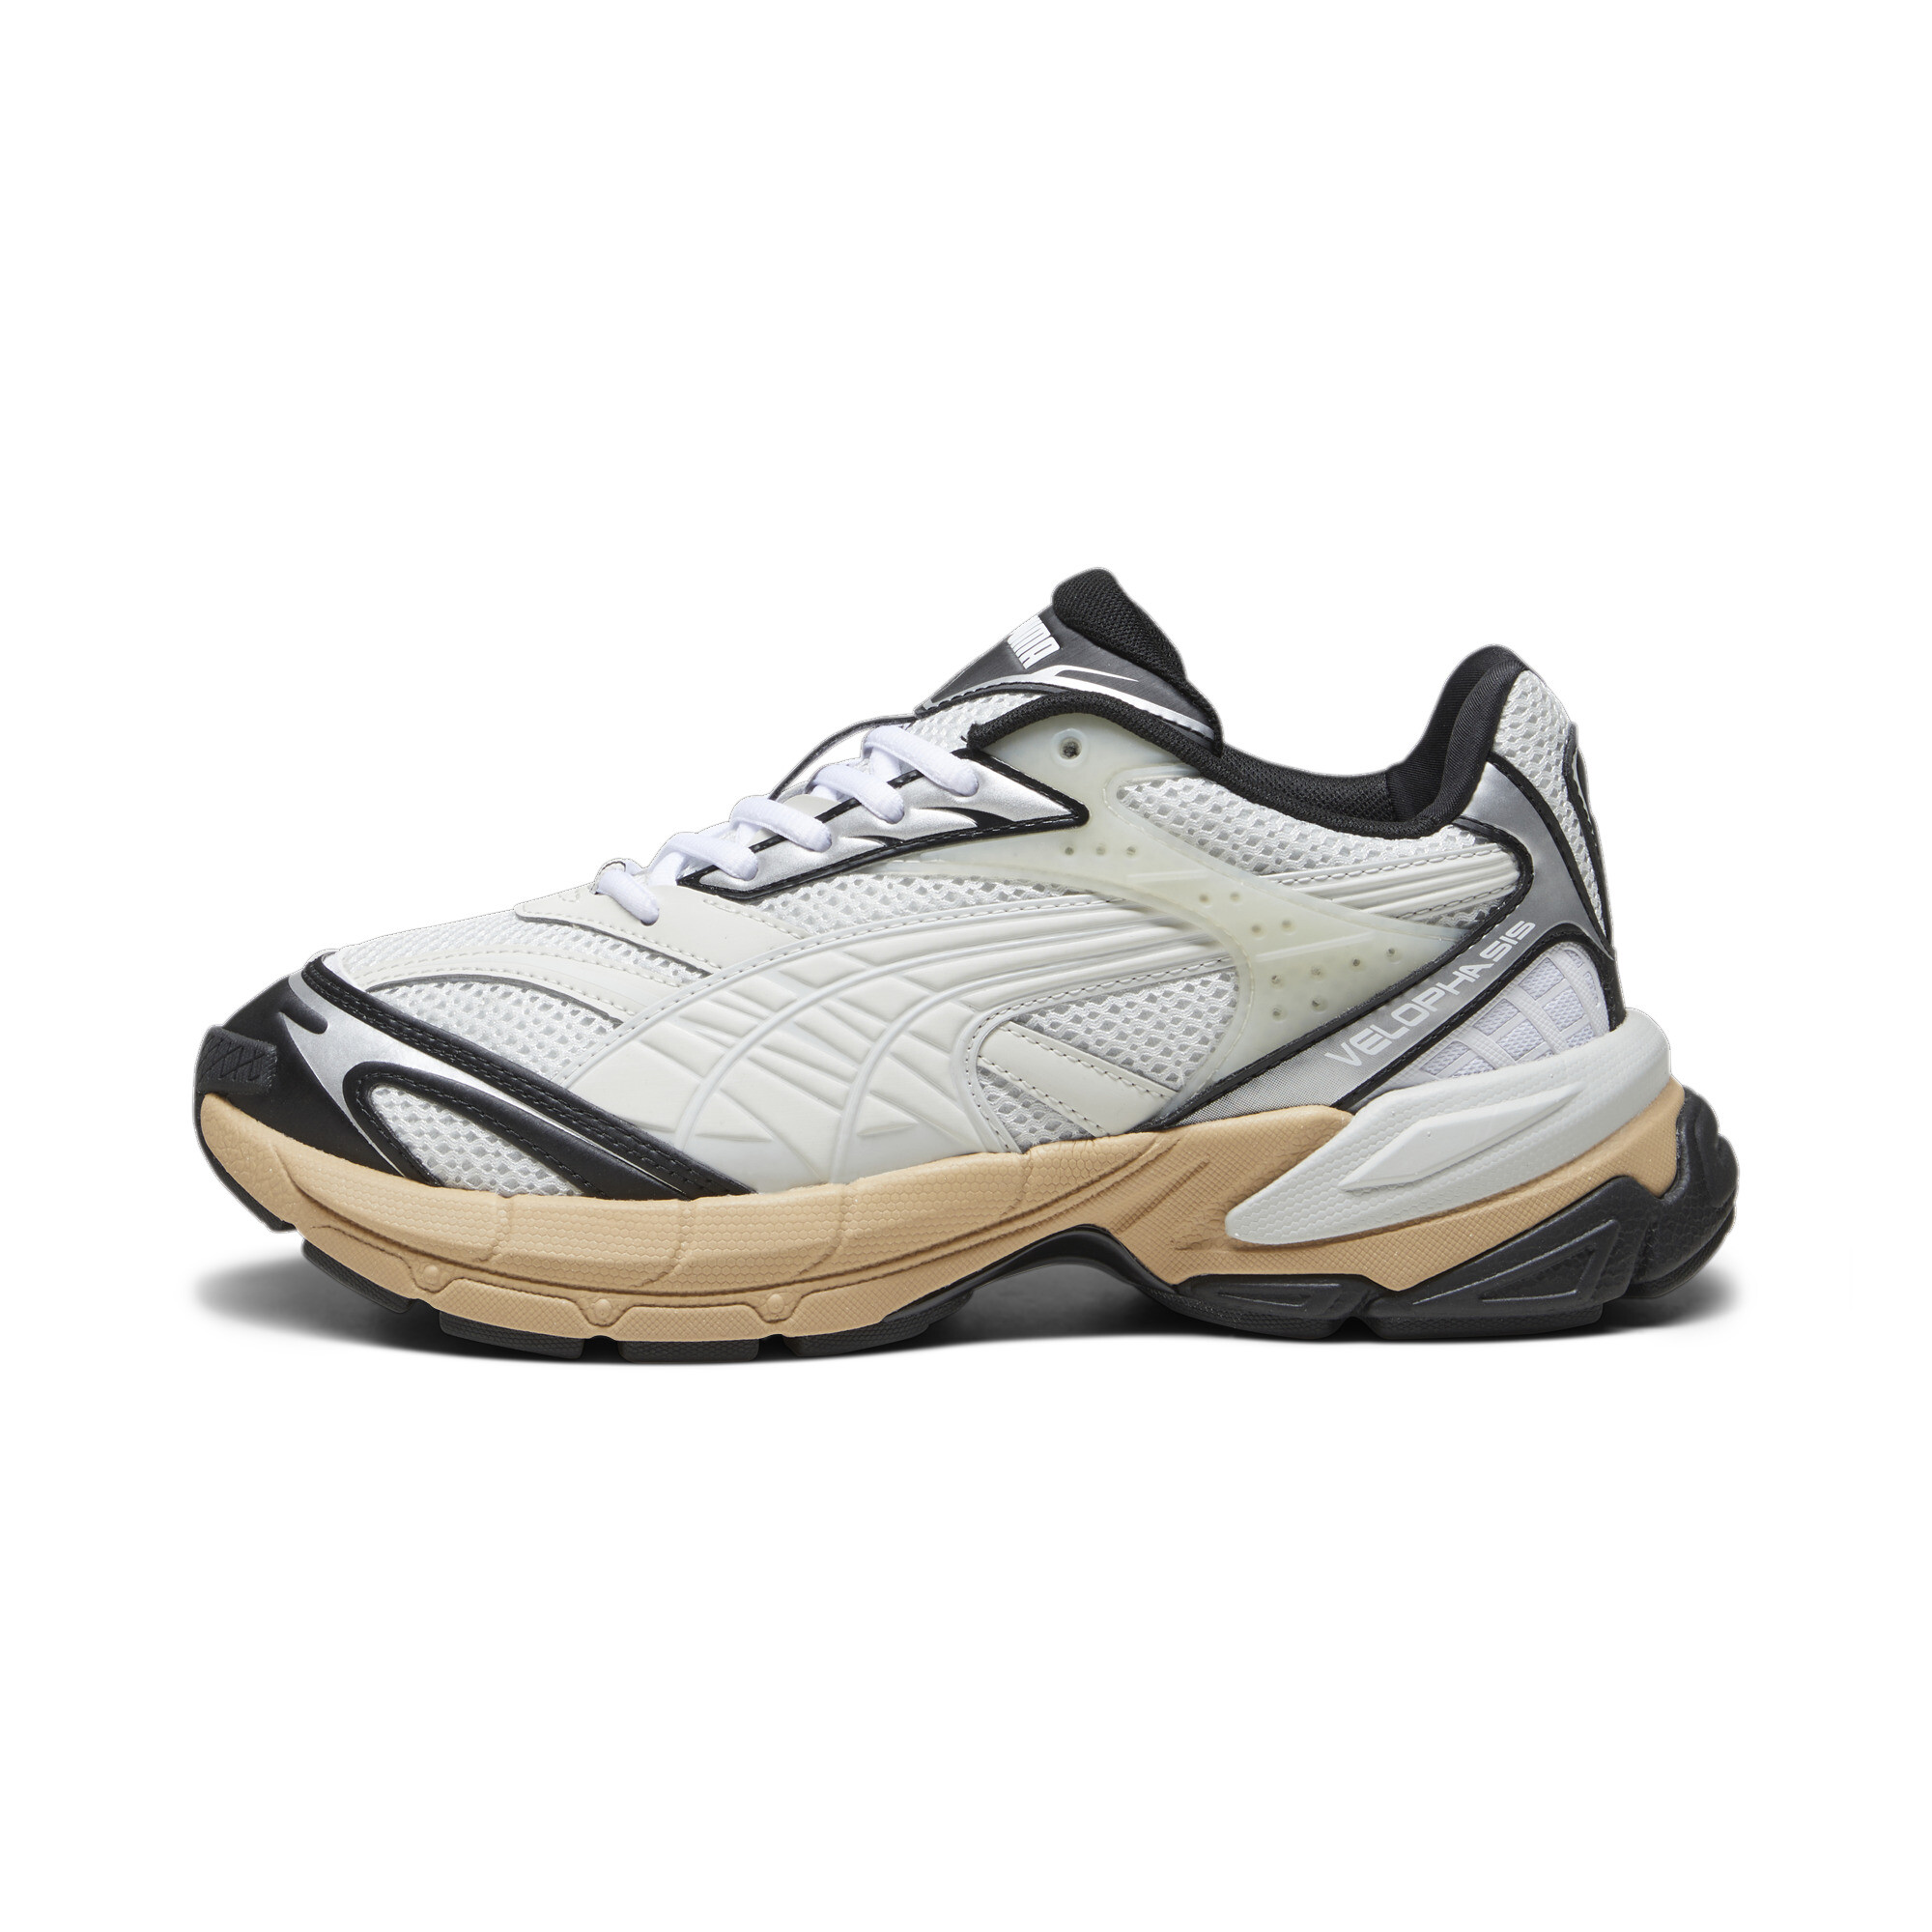 Puma Velophasis Technisch Sneakers, Gray, Size 38.5, Shoes